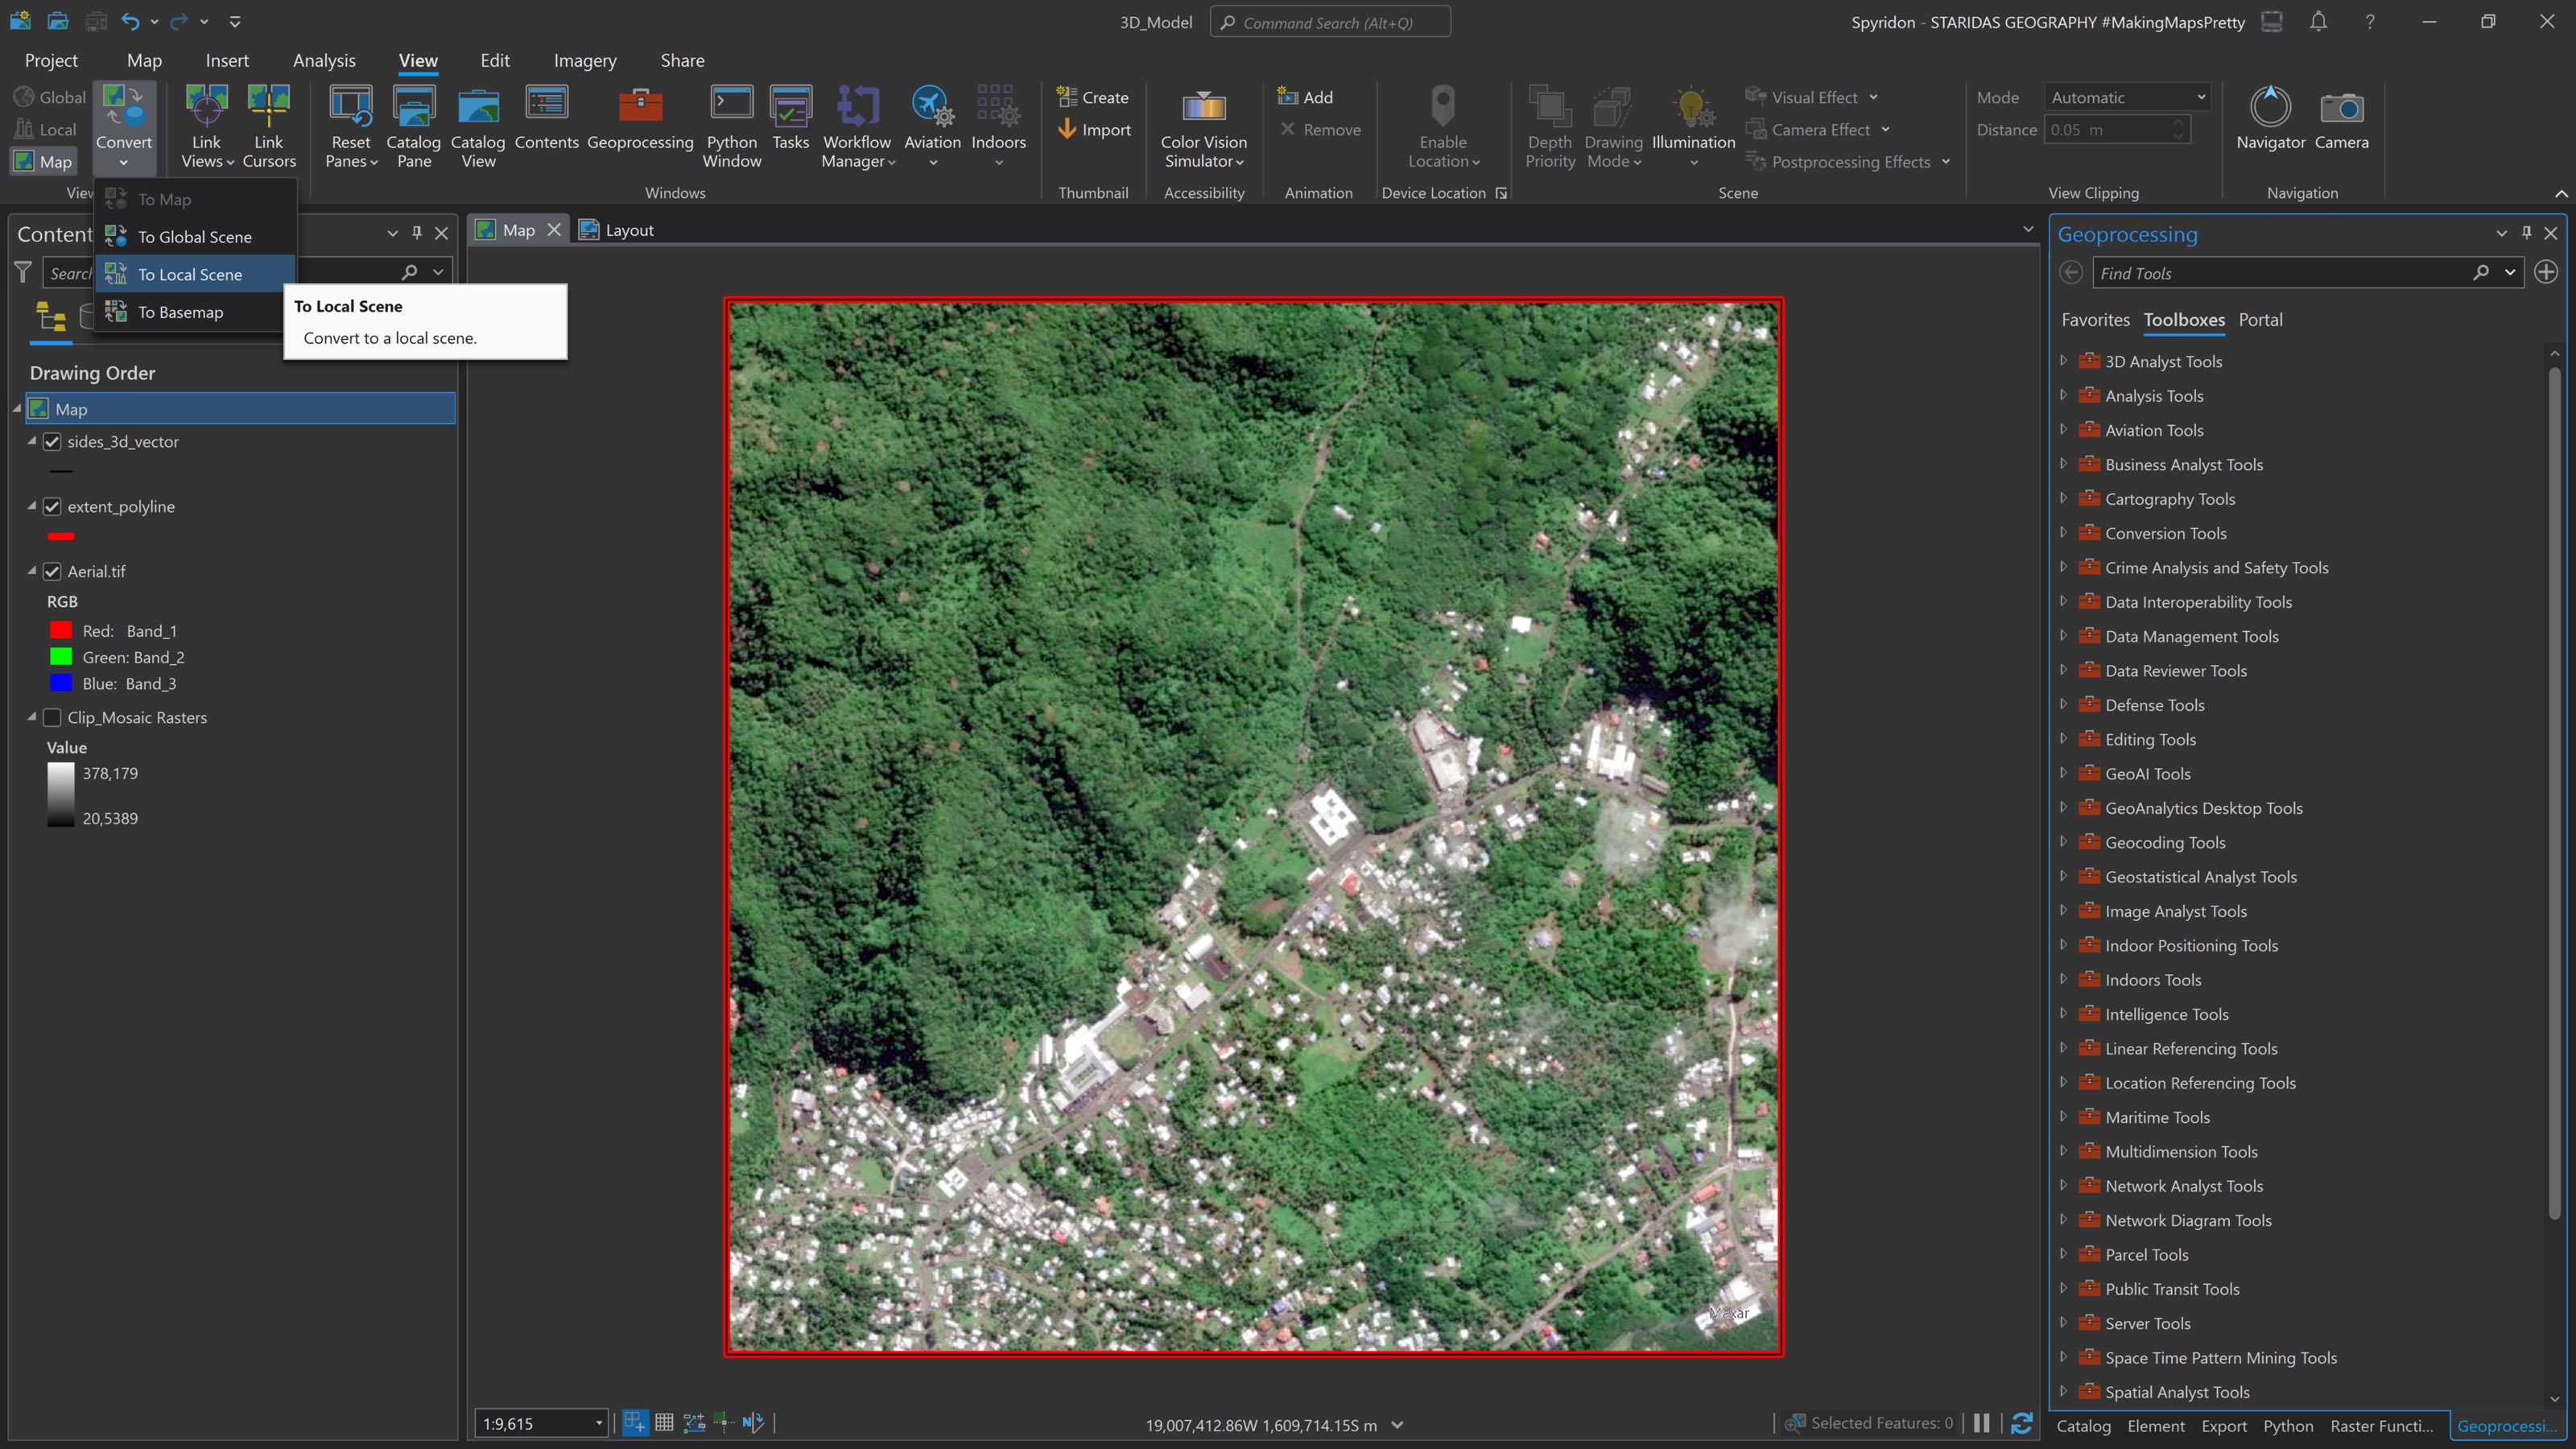 Picture 12: The necessary layers for the 3D model / Converting the Map to a Local Scene.